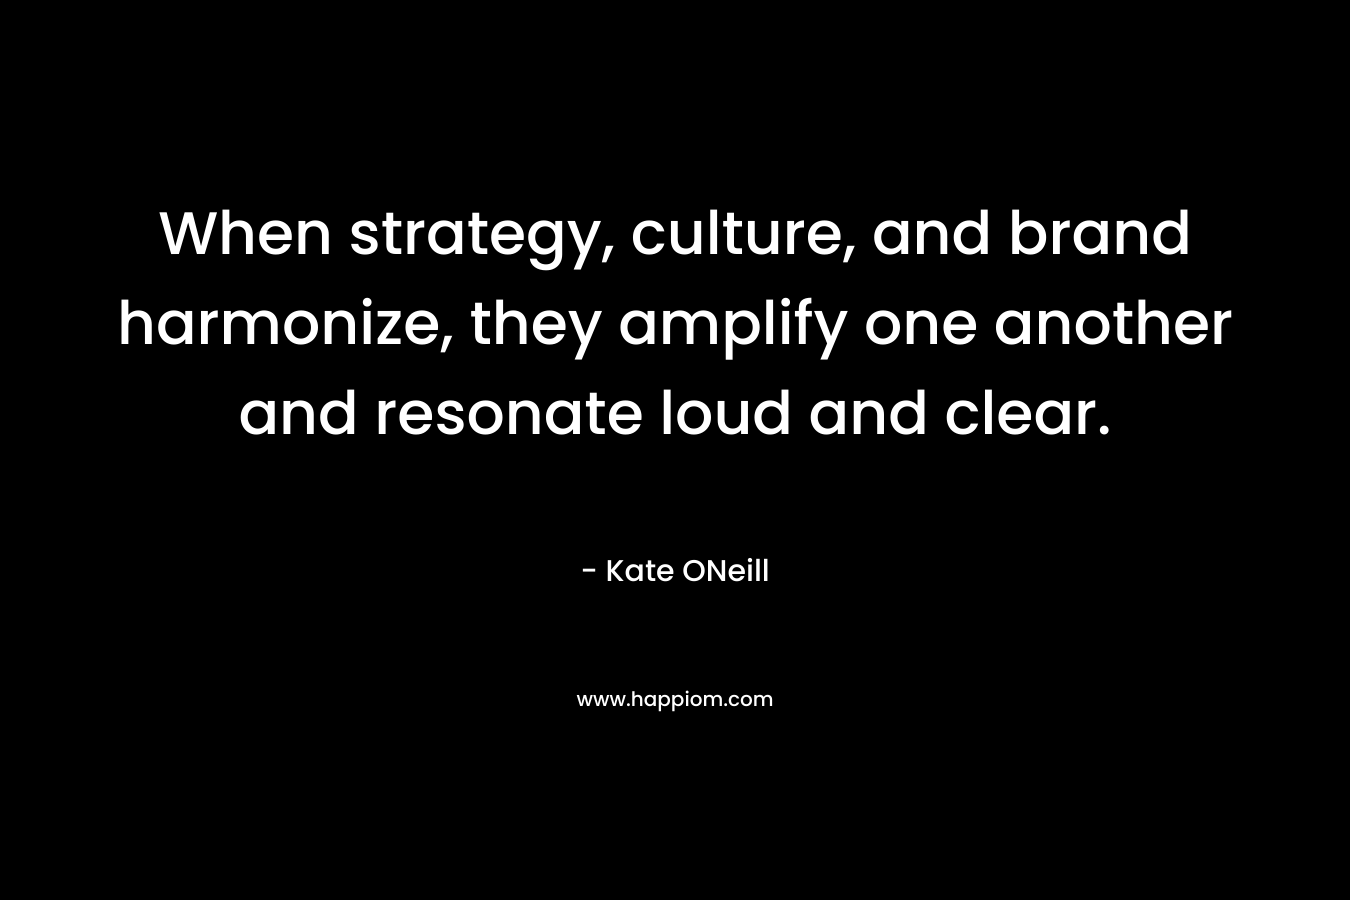 When strategy, culture, and brand harmonize, they amplify one another and resonate loud and clear.